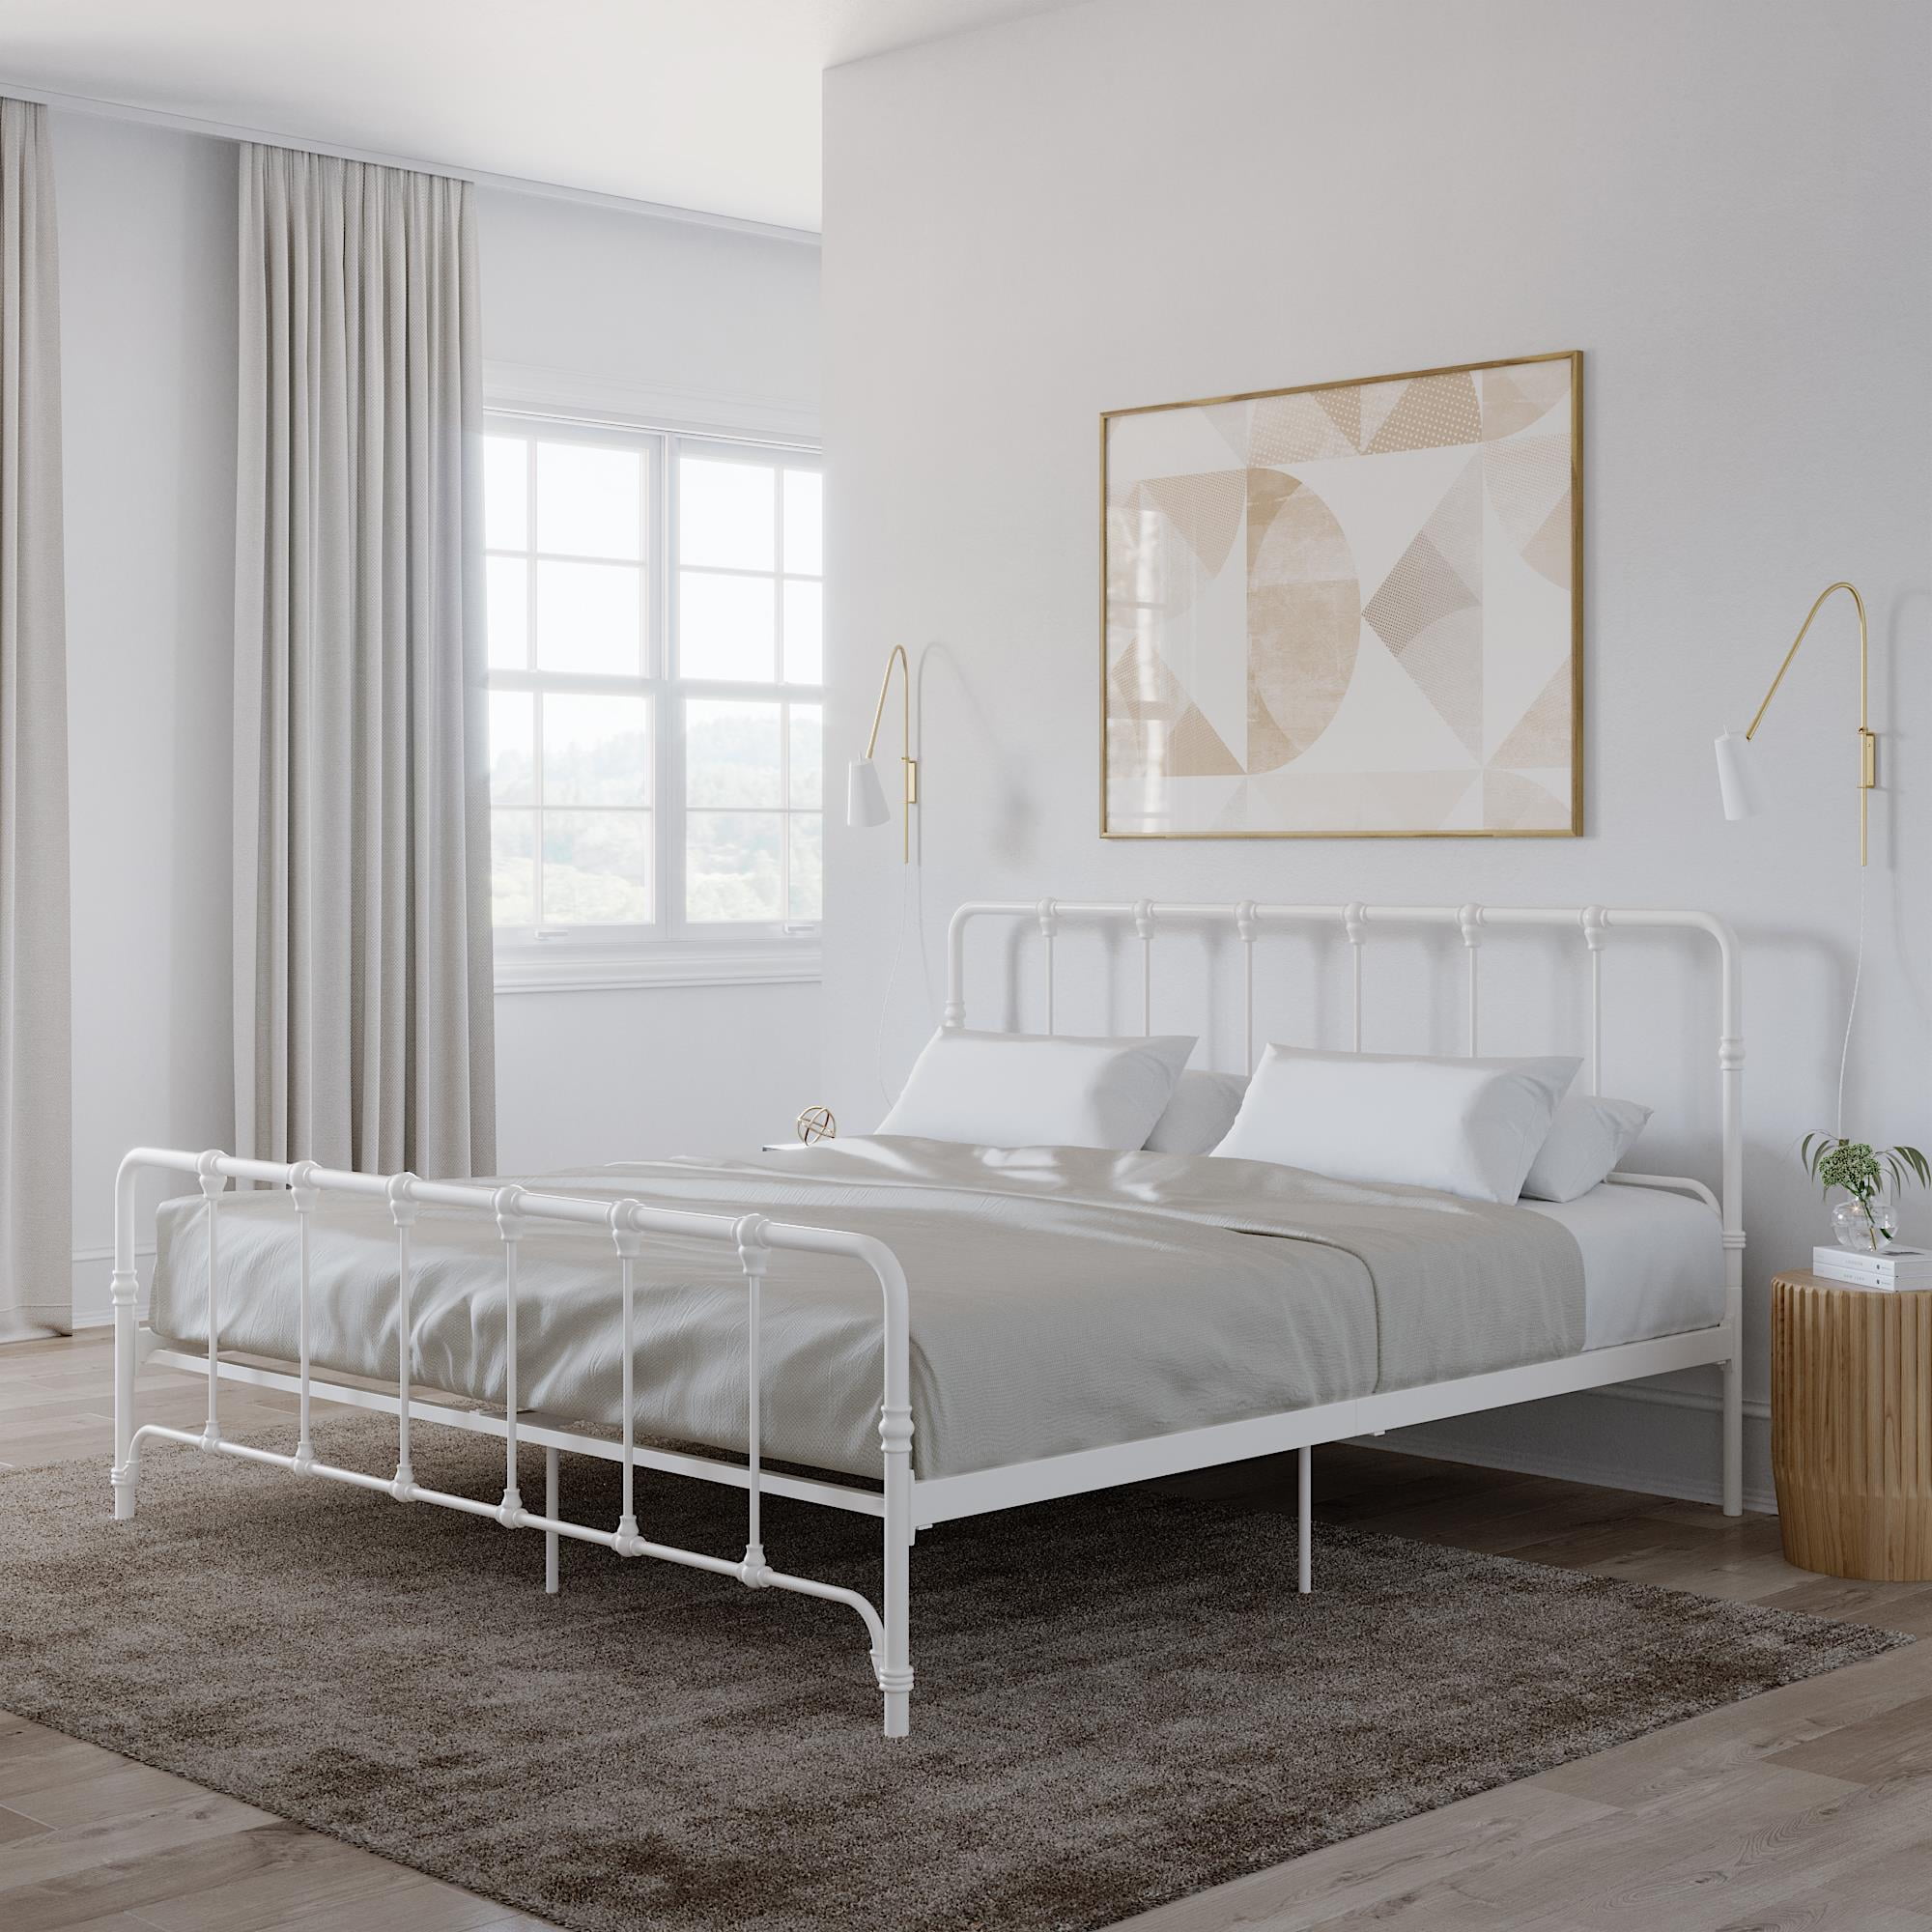 Mainstays Farmhouse Metal Bed King, Bed Frame King White